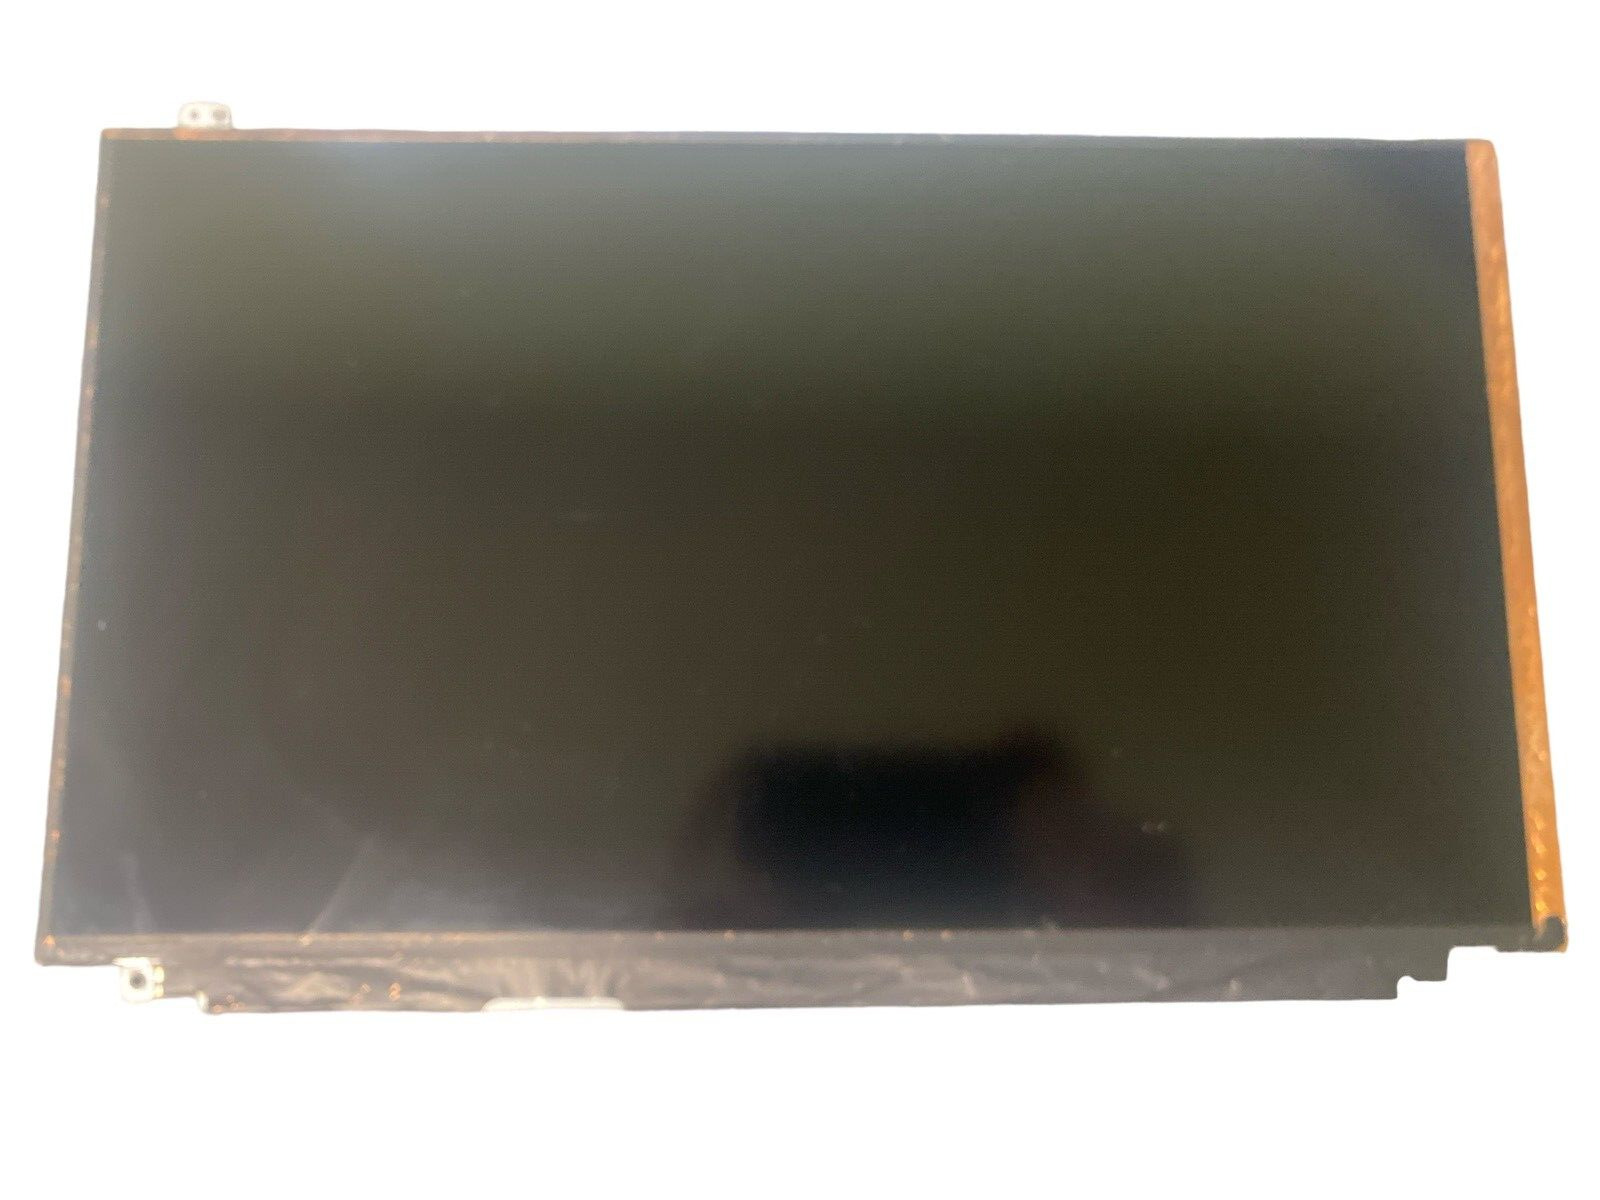 Lenovo SD10A09771 2880 x 1620 15.6 in Matte LCD Laptop Screen TESTED